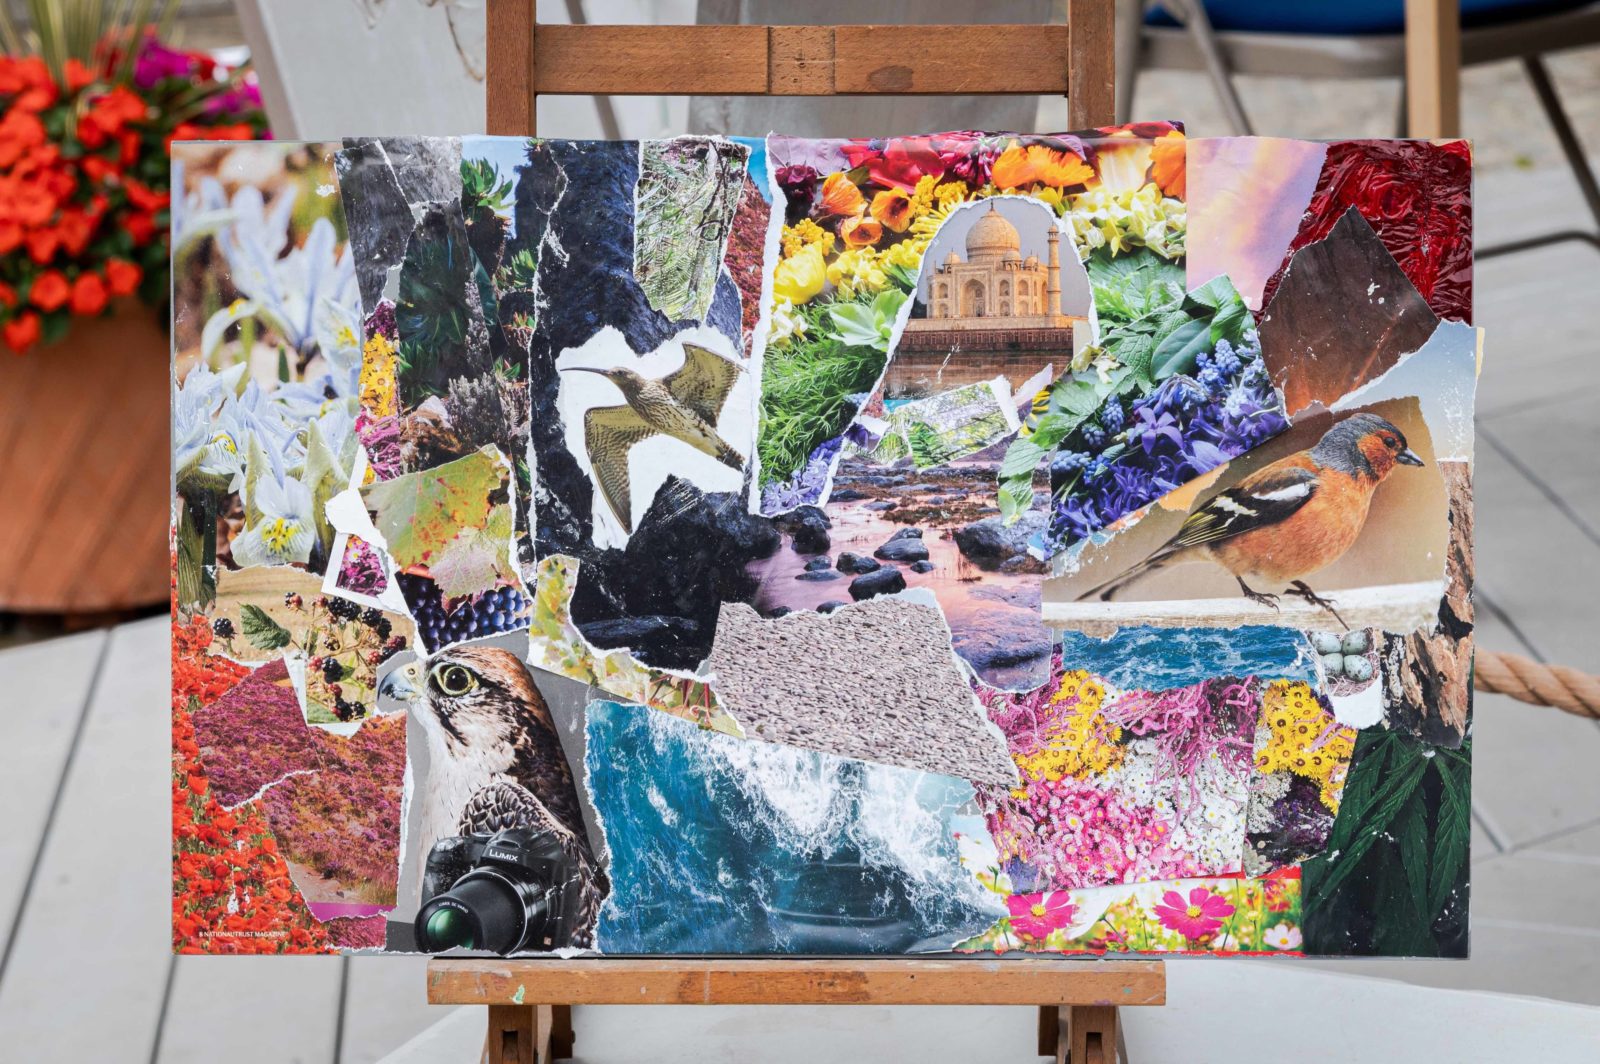 A collage on a wooden board is photographed leaning on an easel.